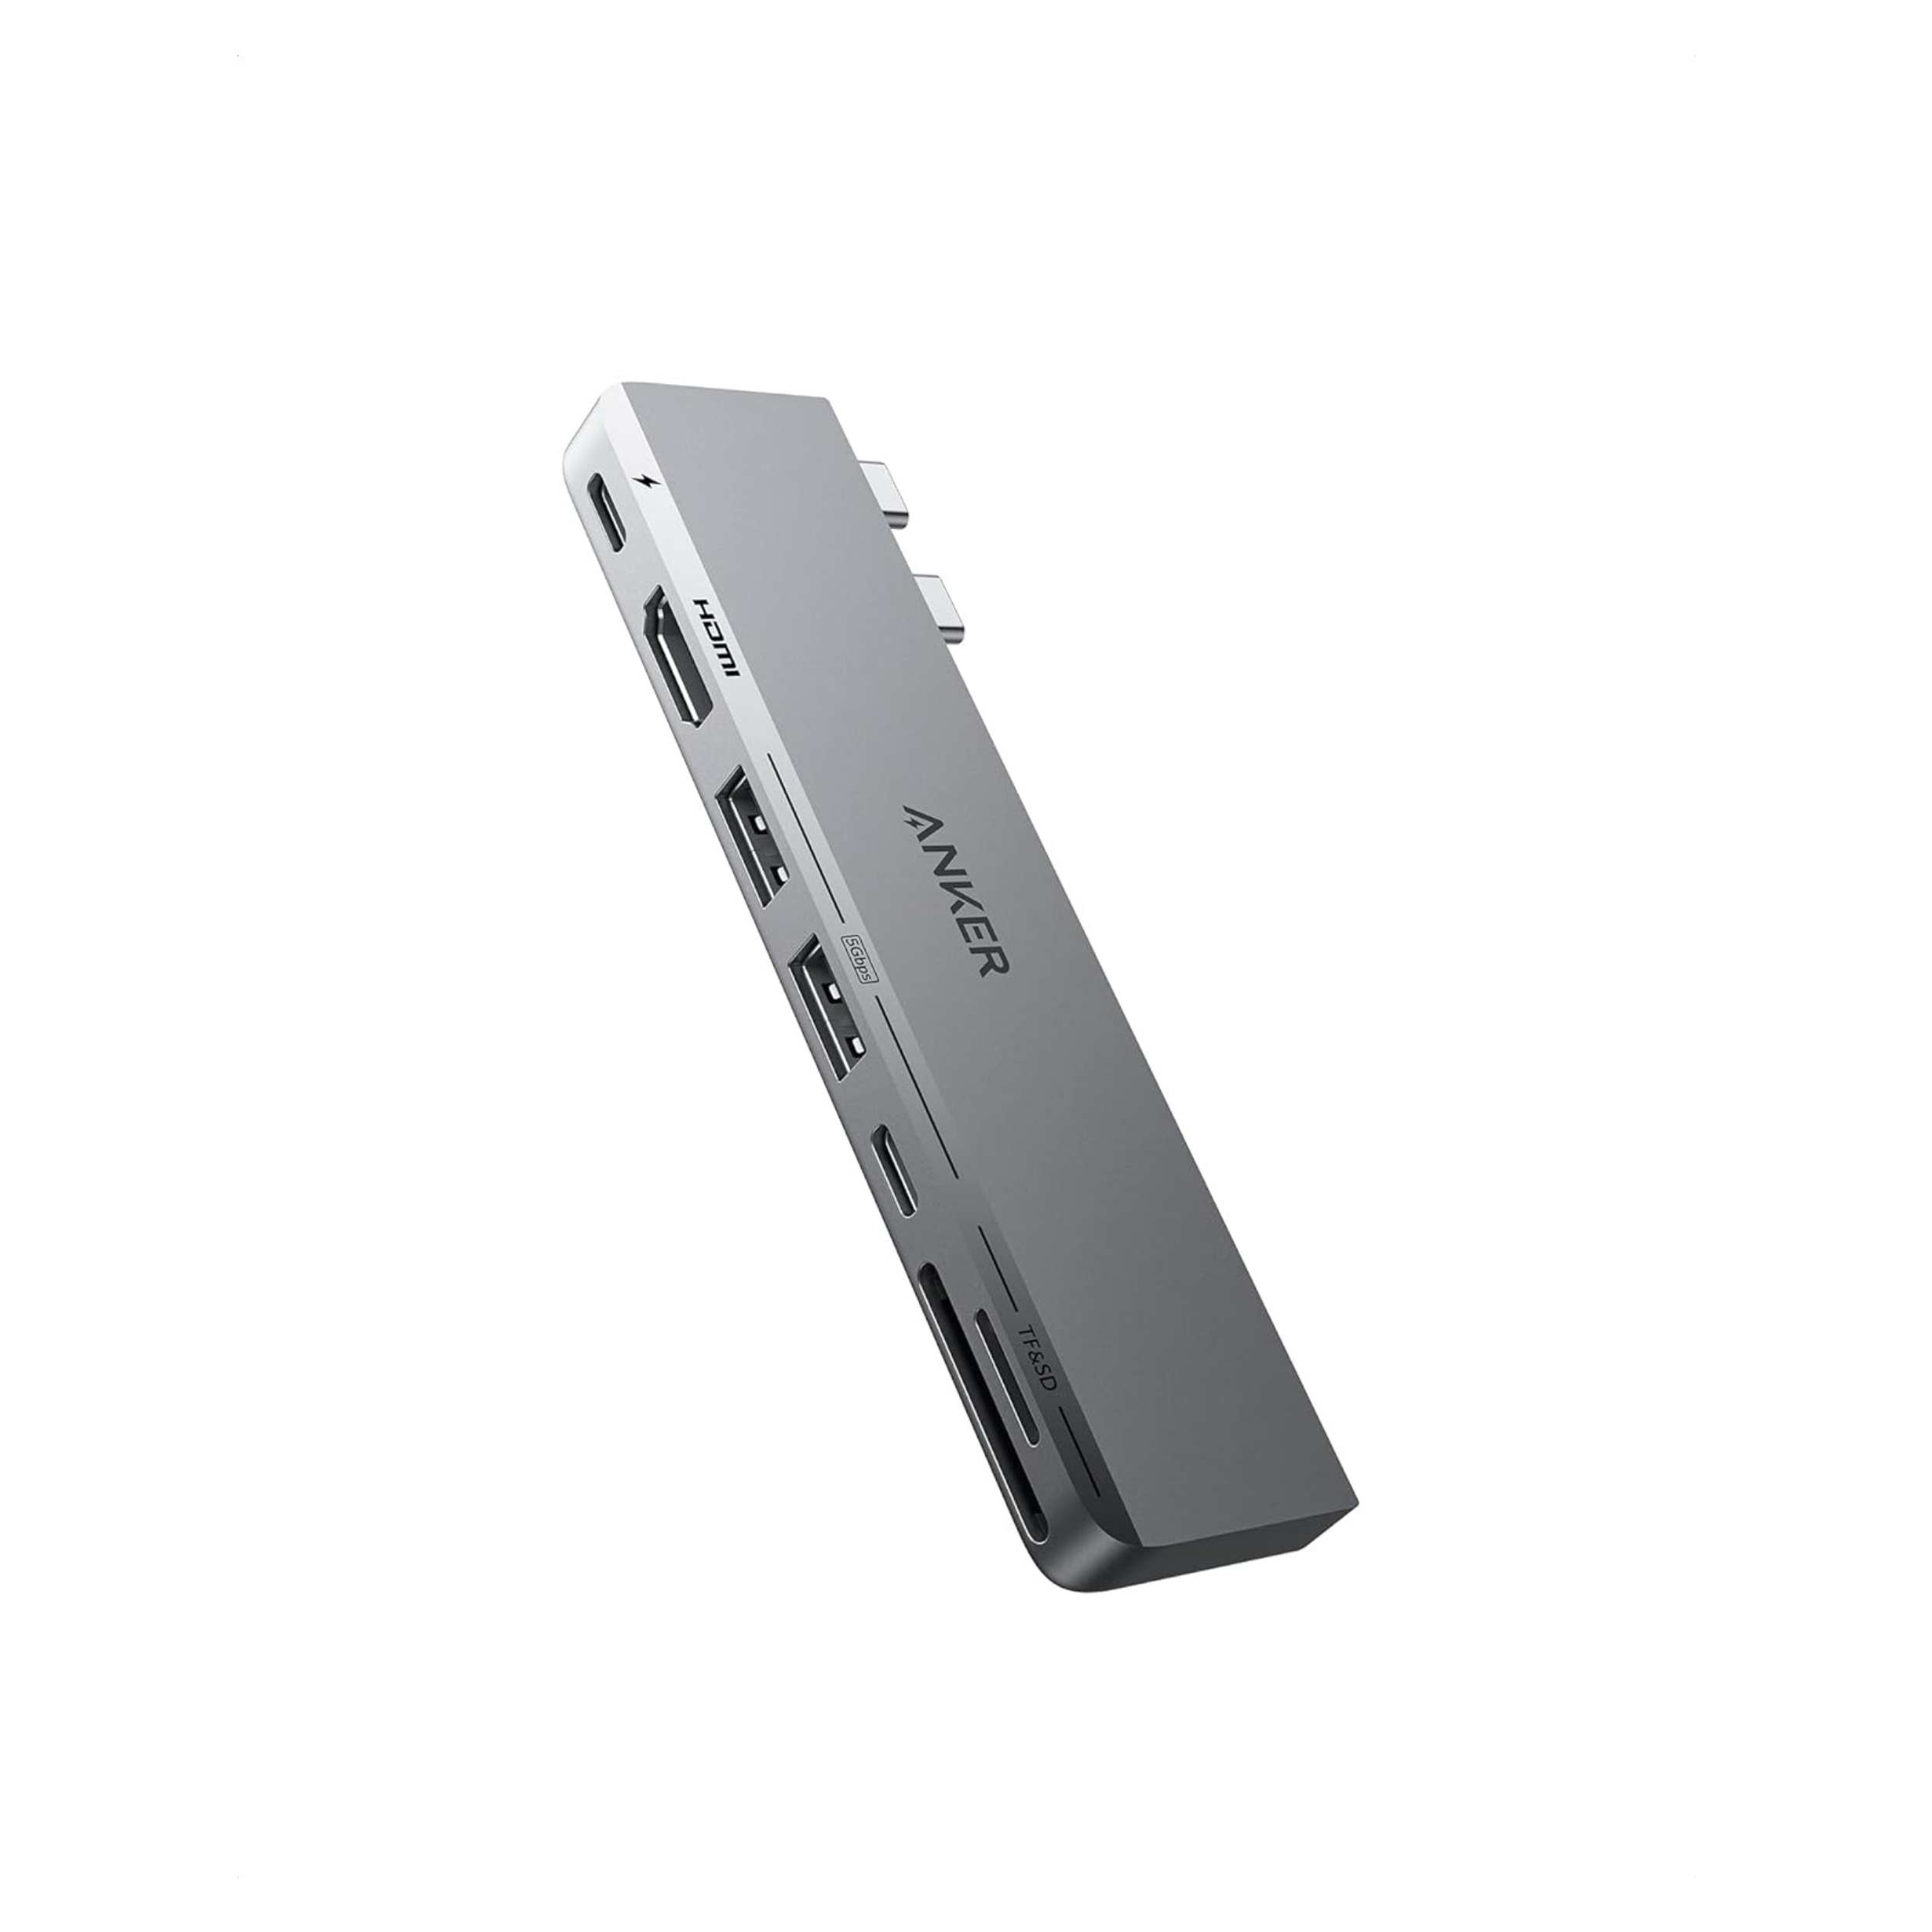 Buy The Anker 547 USB-C Hub (7-in-2, for MacBook) from Anker BD at a low price in Bangladesh